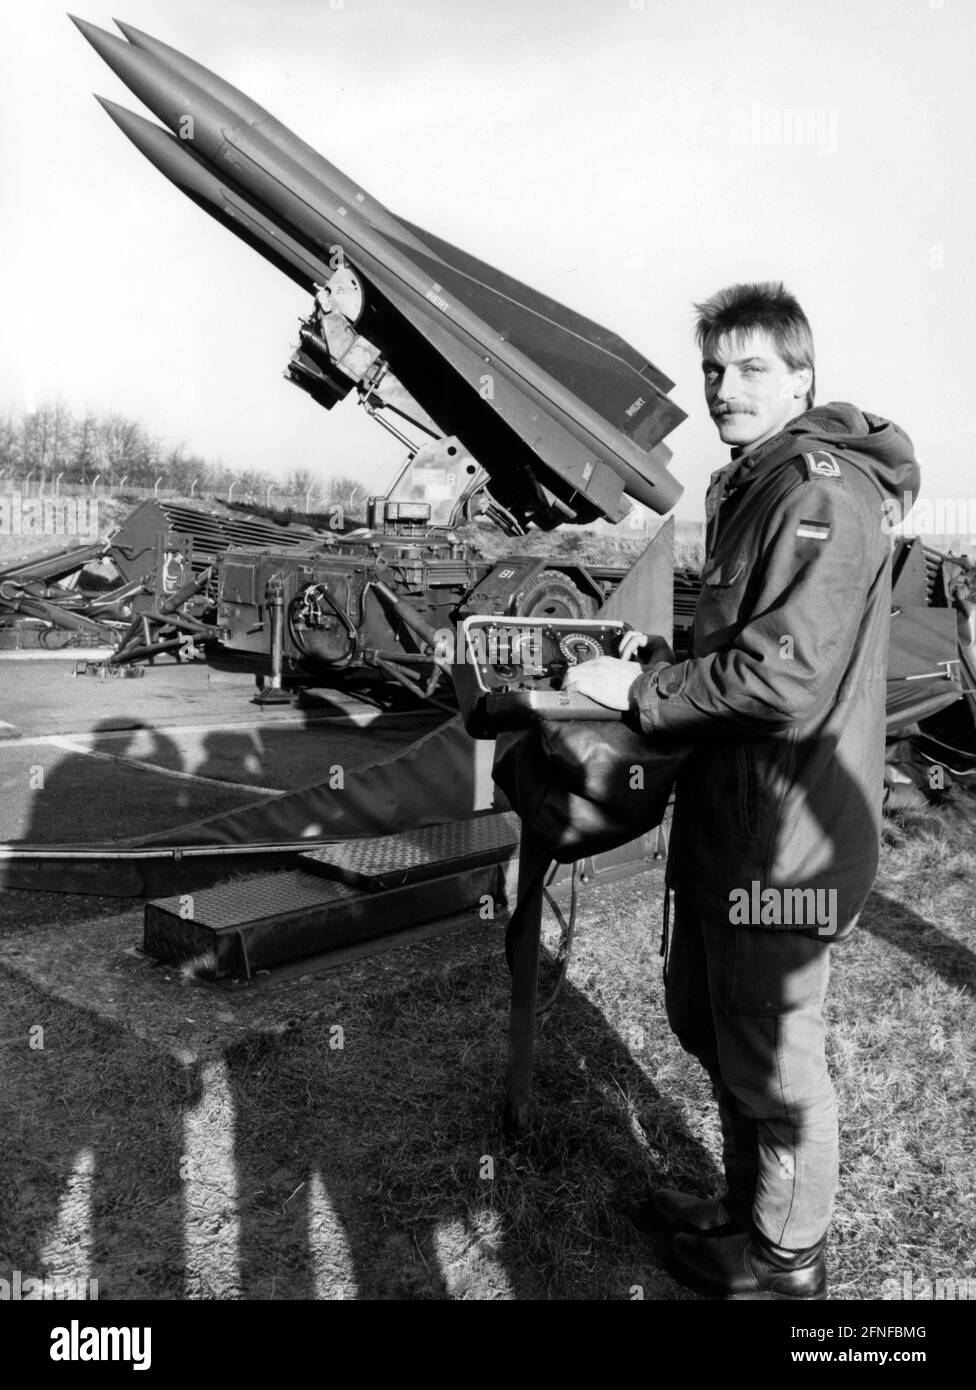 The Hawk missile was introduced into the Bundeswehr in the course of the 60s. Because of its great susceptibility to error and high complexity, it was given some joke names in the troops such as, Hinkelstein AbWurf Katapult or Heute Alles Wieder Kaputt. [automated translation] Stock Photo